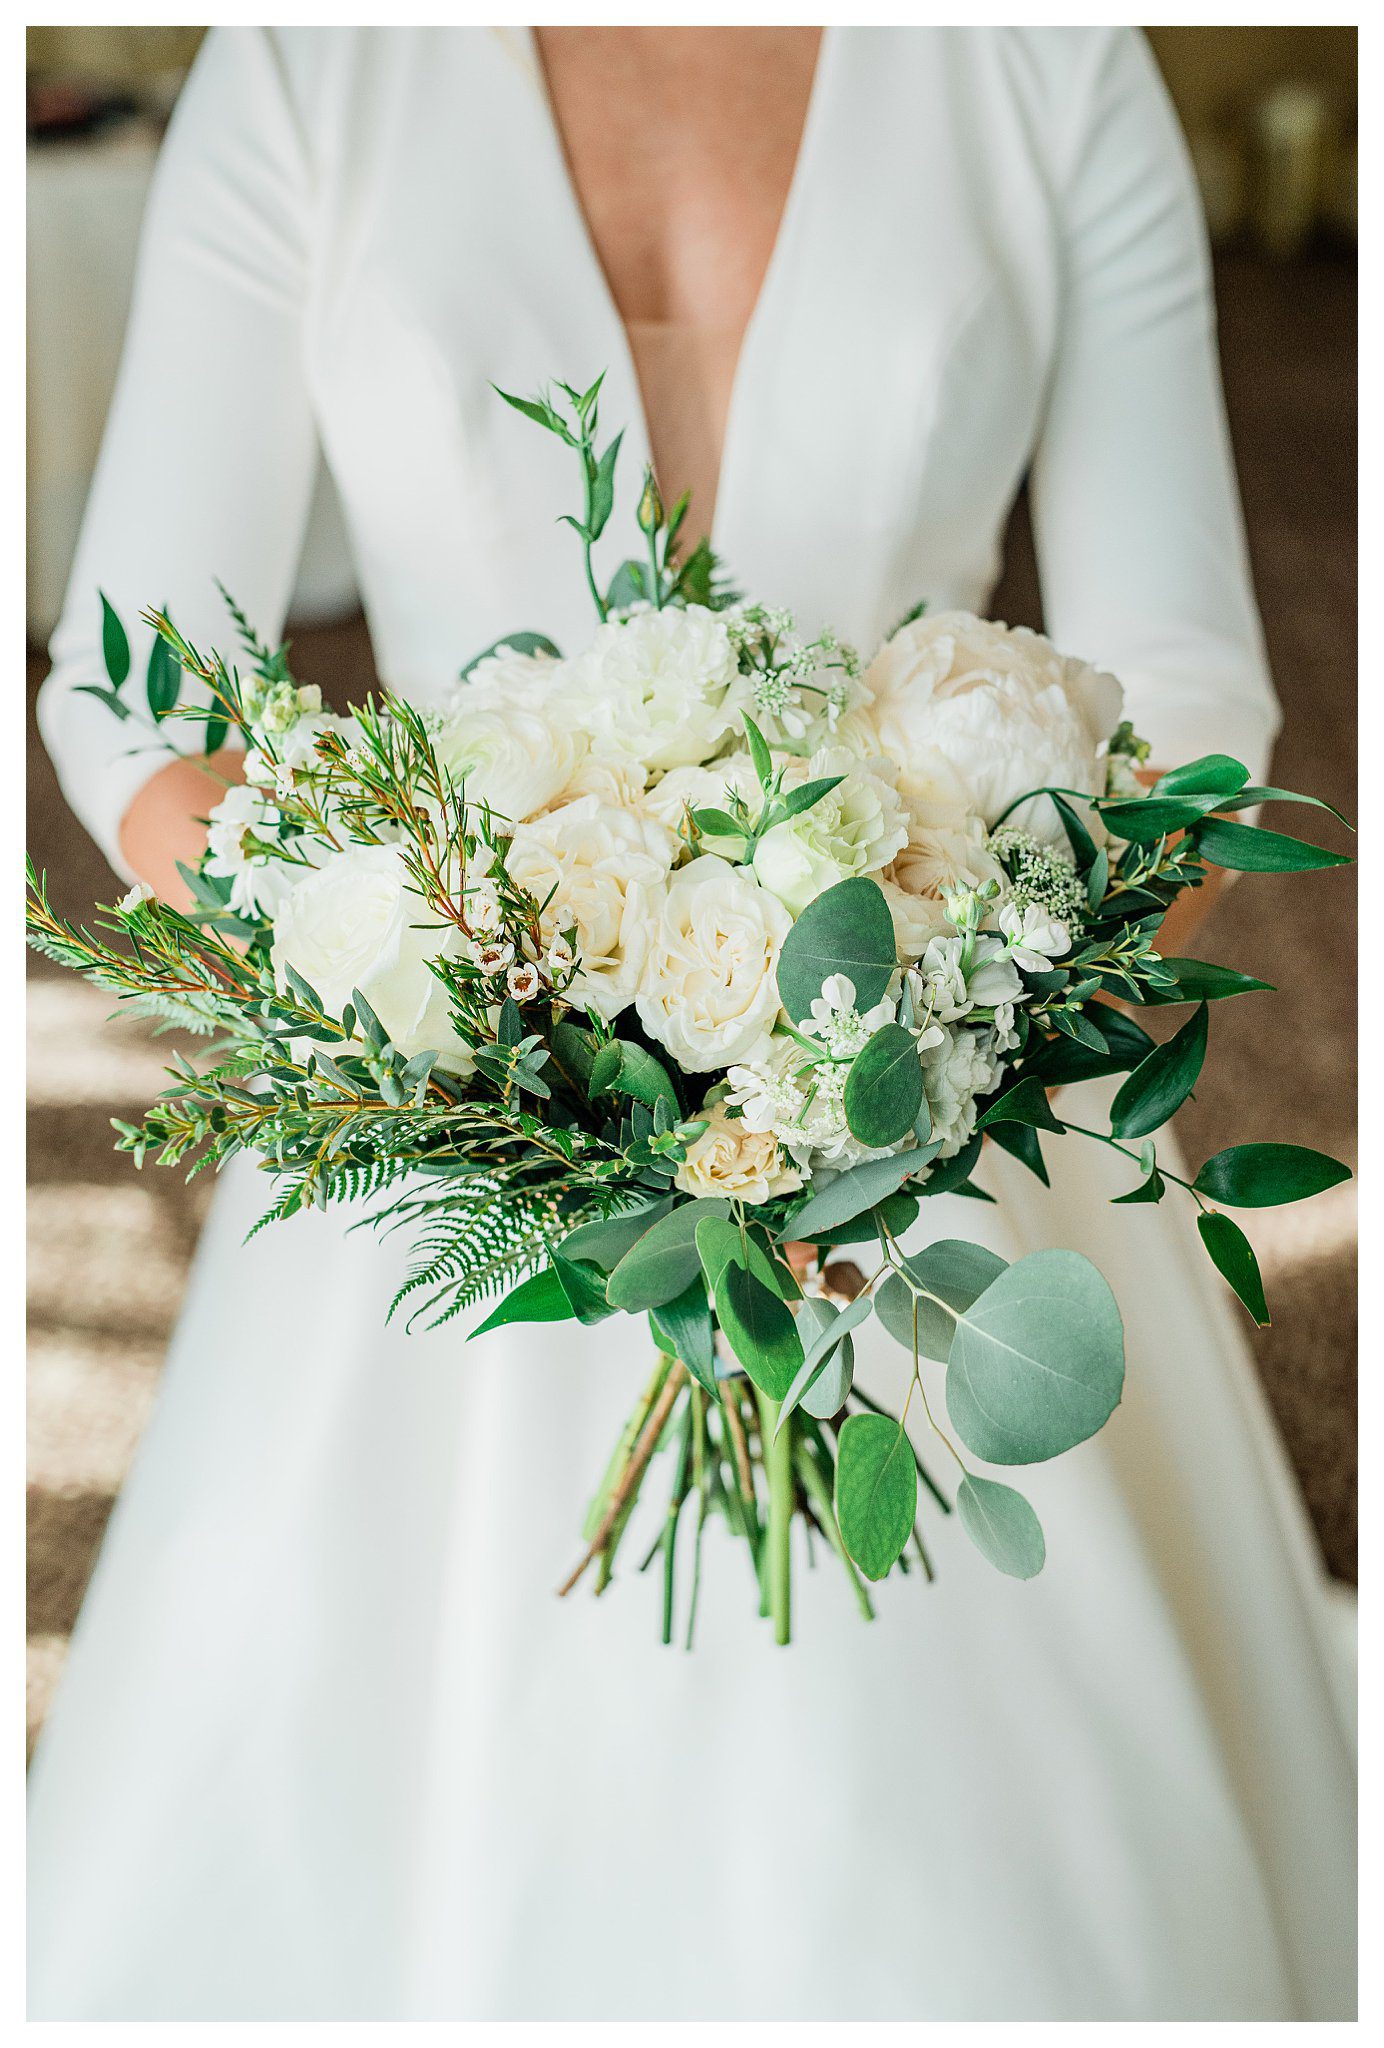 Bride holding up green and white bouquet of wedding flowers.